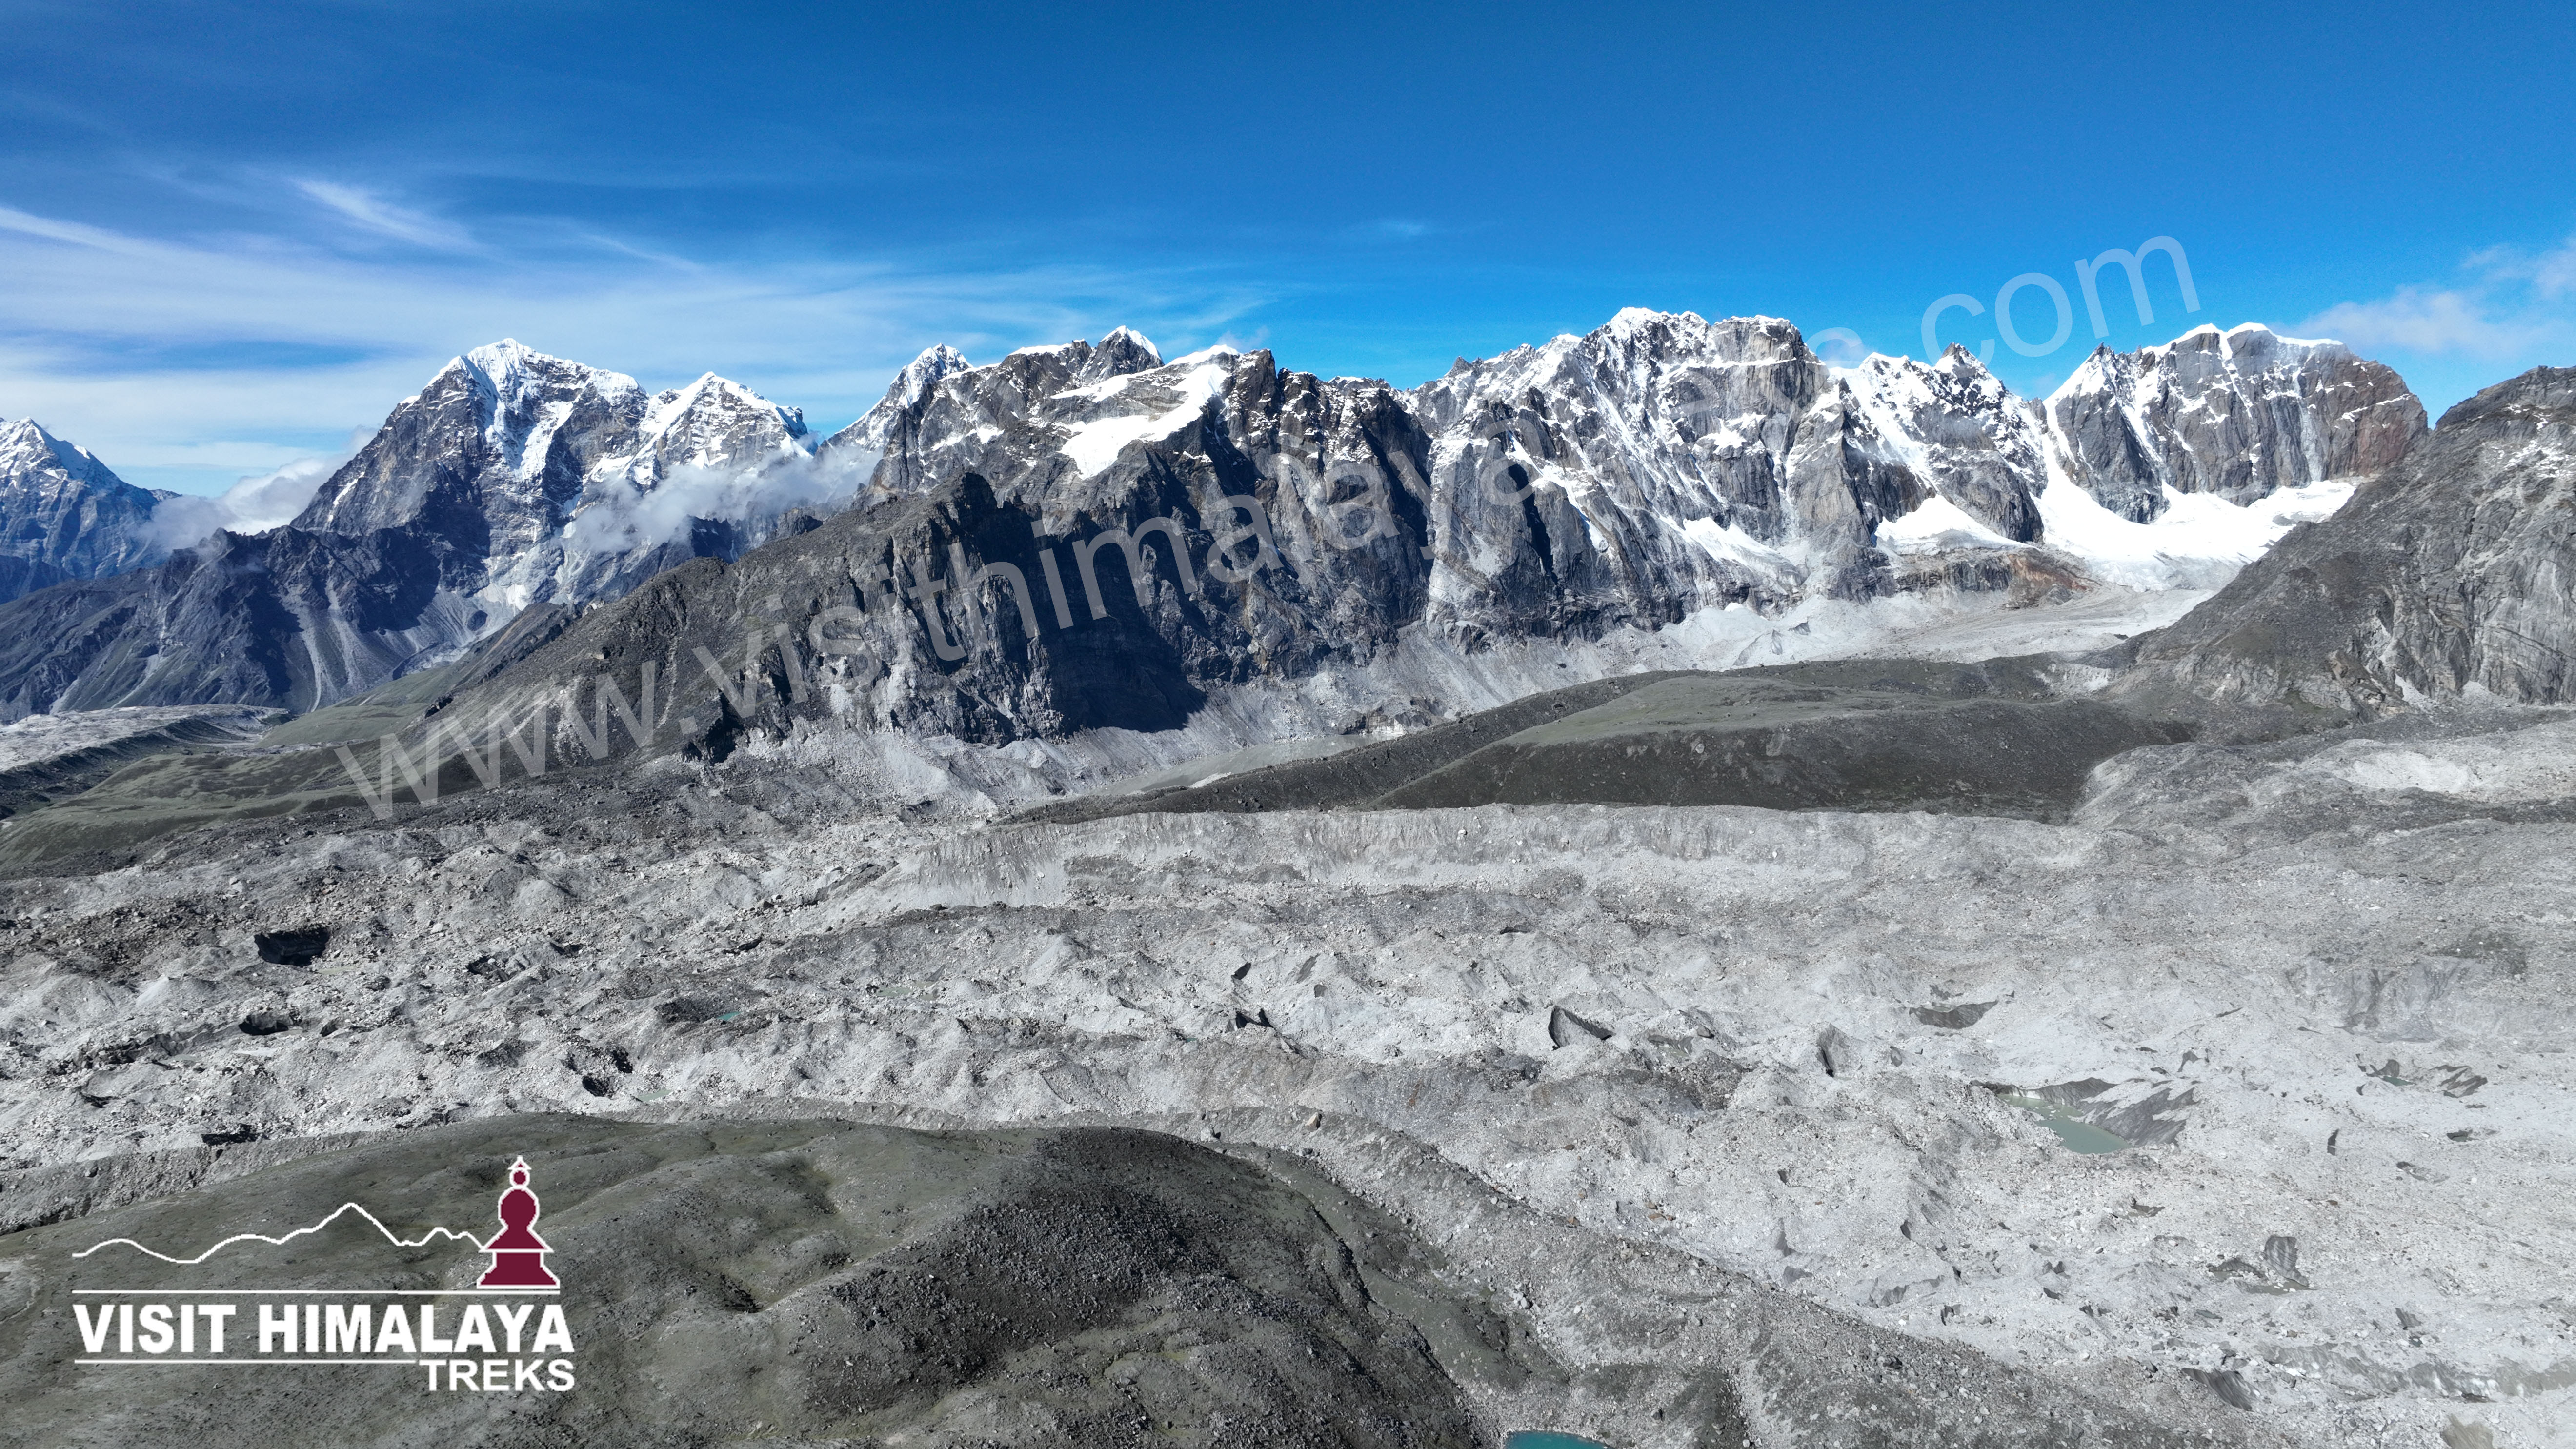 Glacial View of Everest Base Camp from Gorekshep